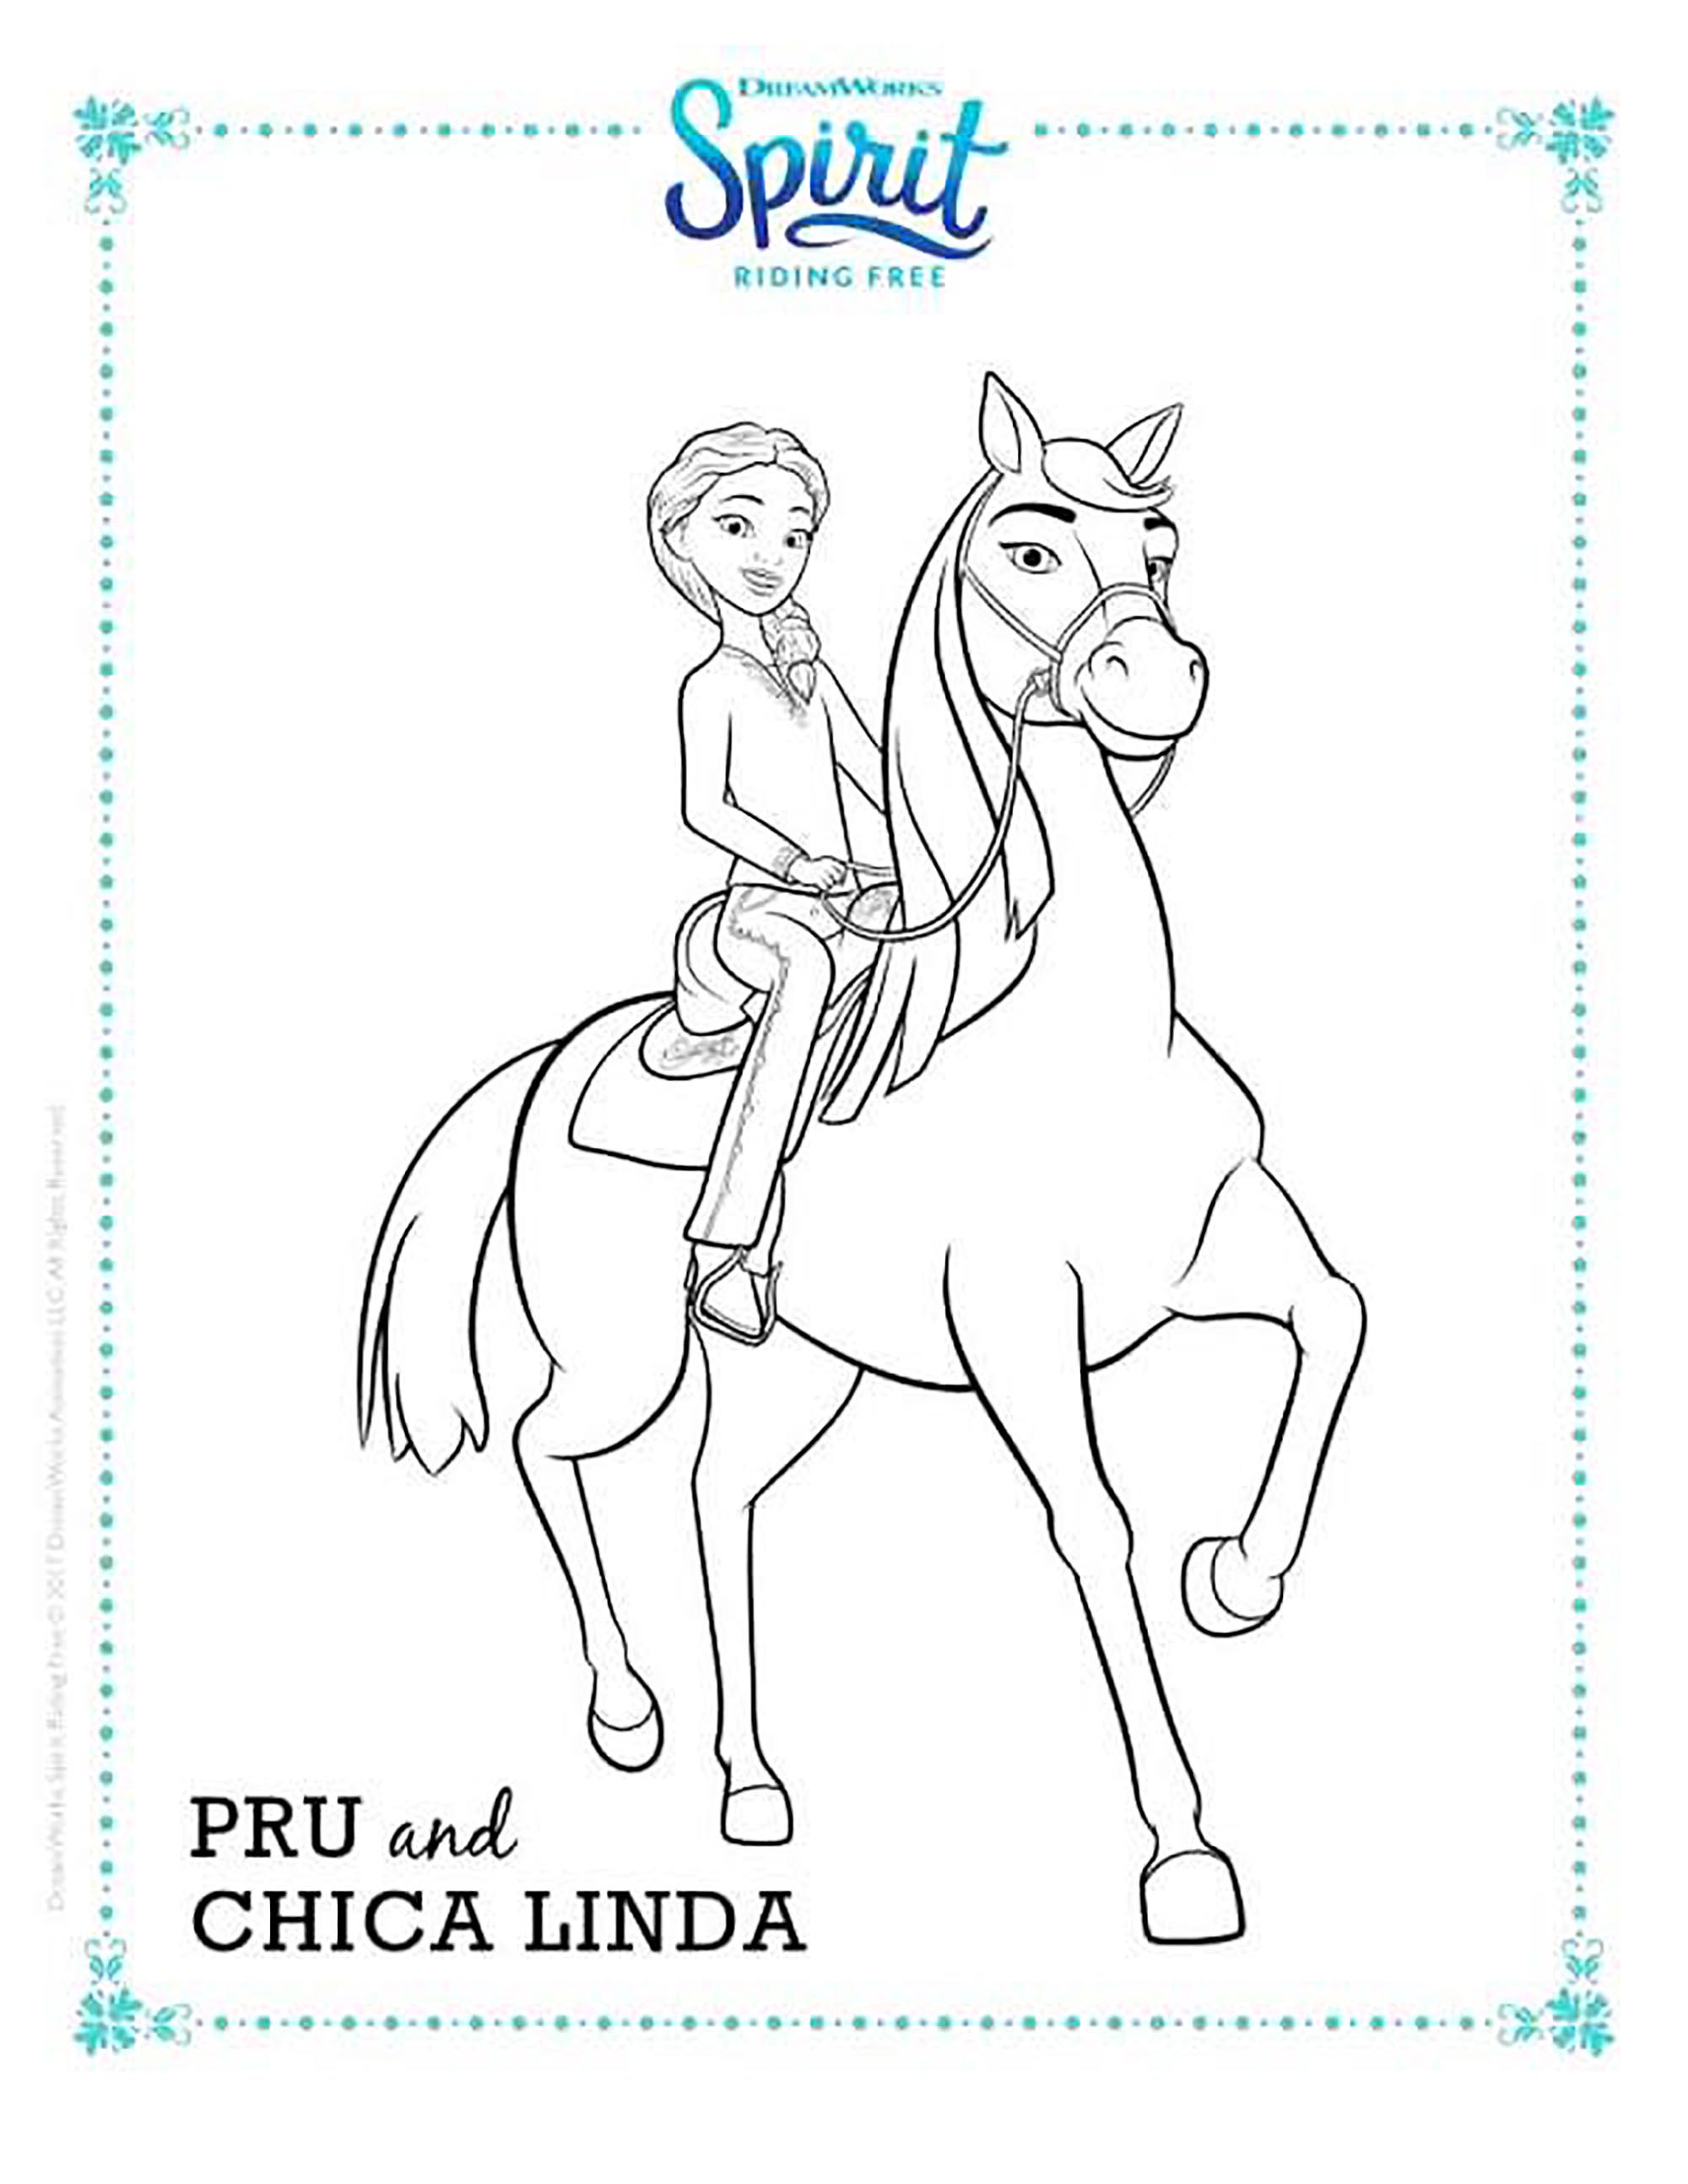 Funny free Spirit coloring page to print and color